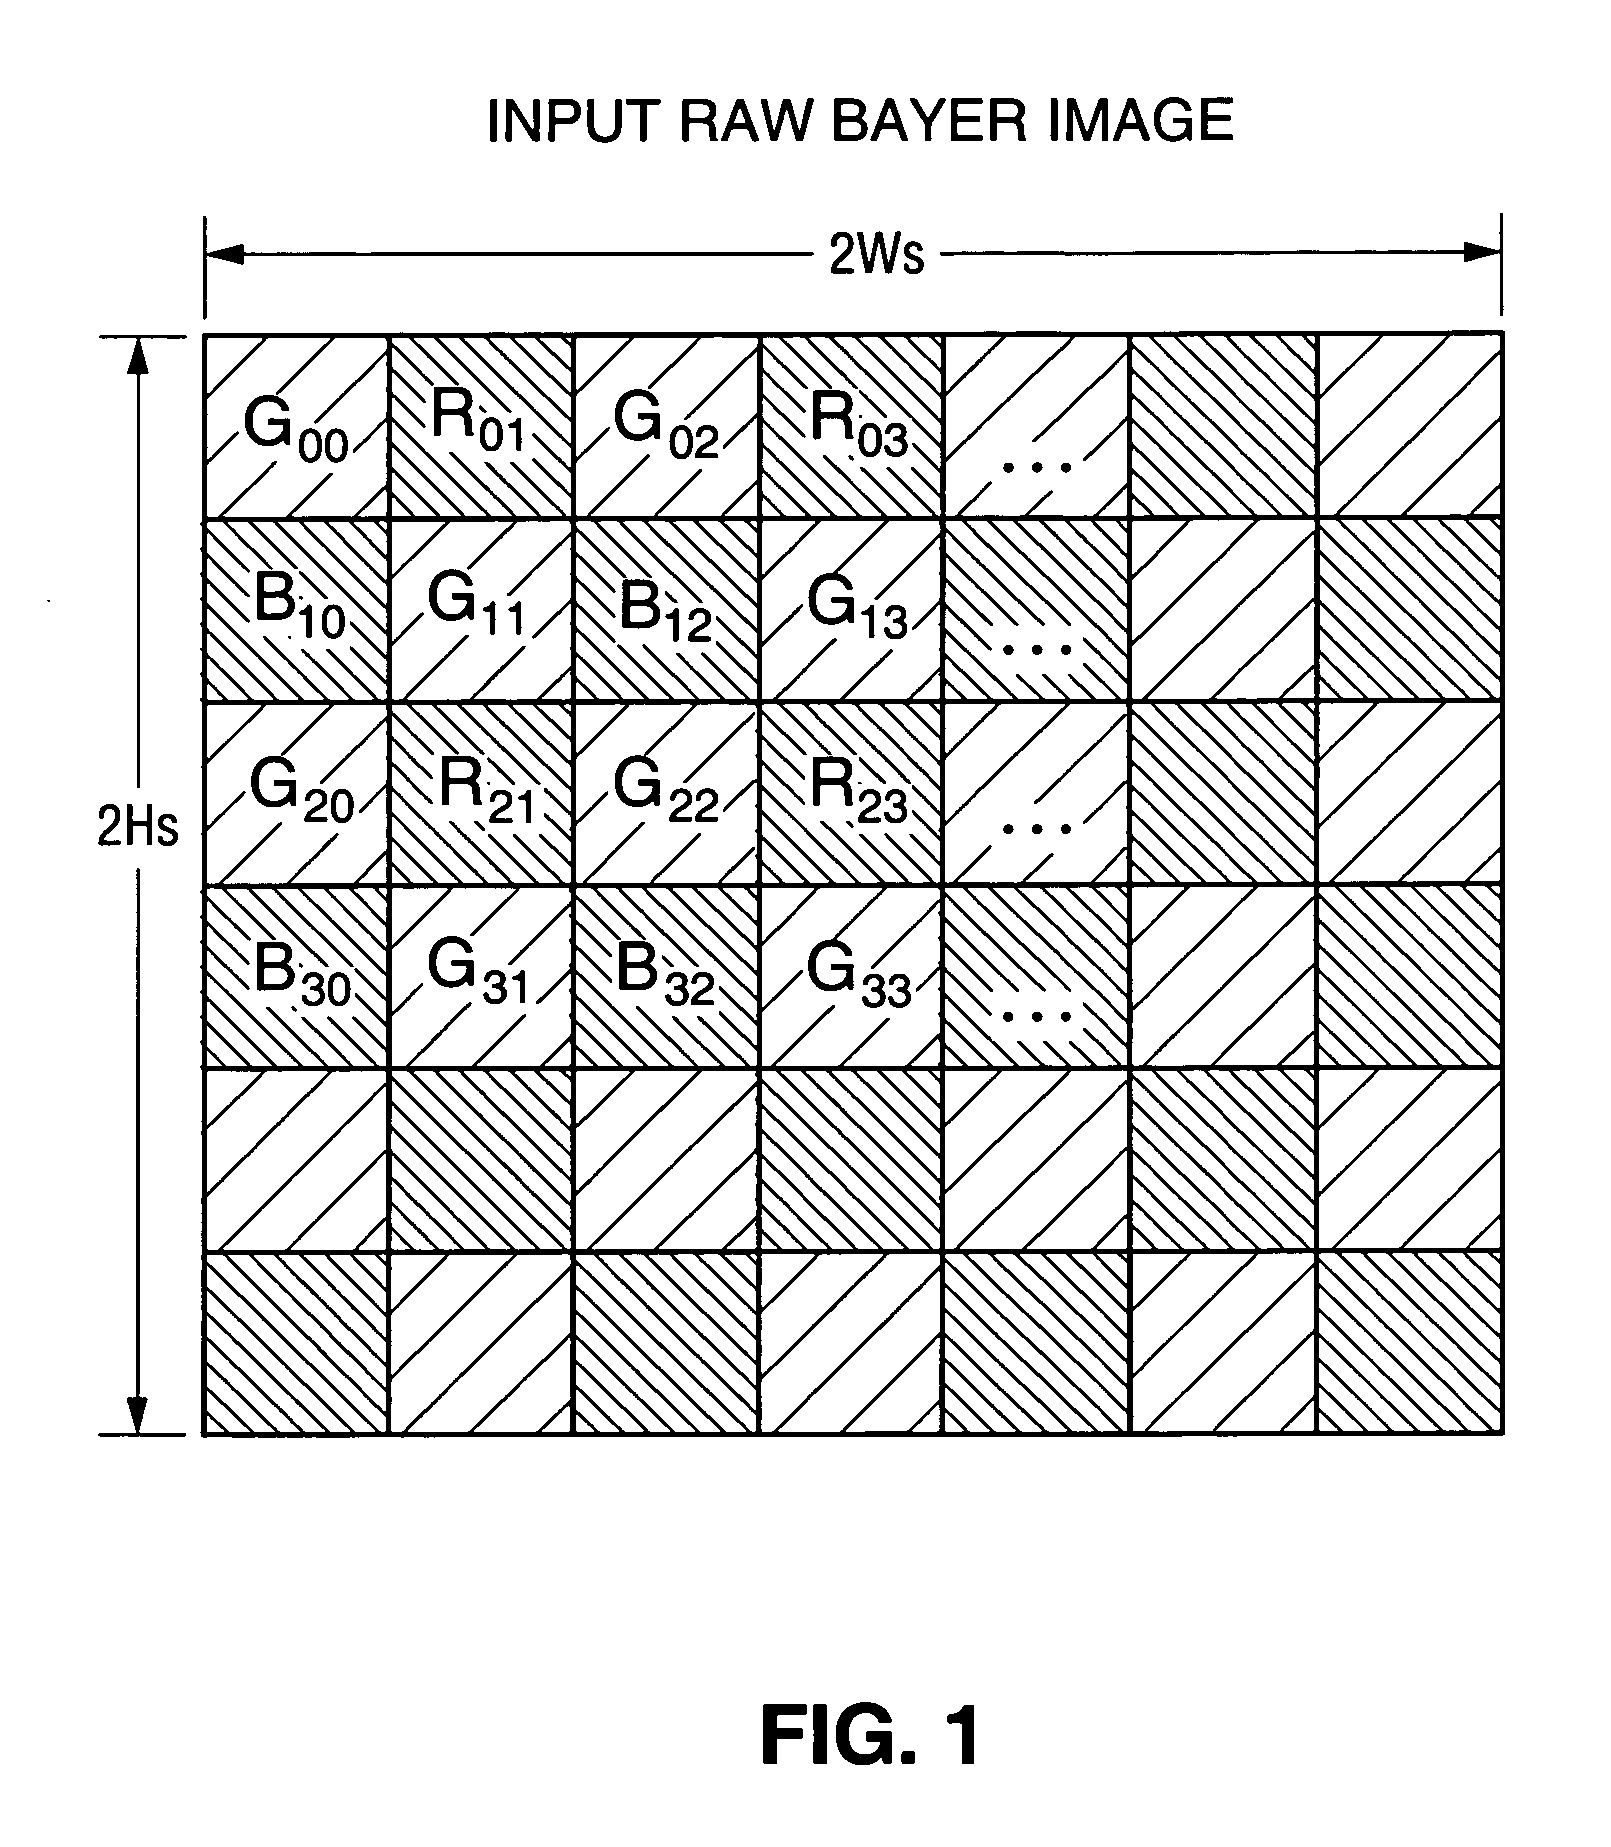 Method and circuit for integrated de-mosaicing and downscaling preferably with edge adaptive interpolation and color correlation to reduce aliasing artifacts